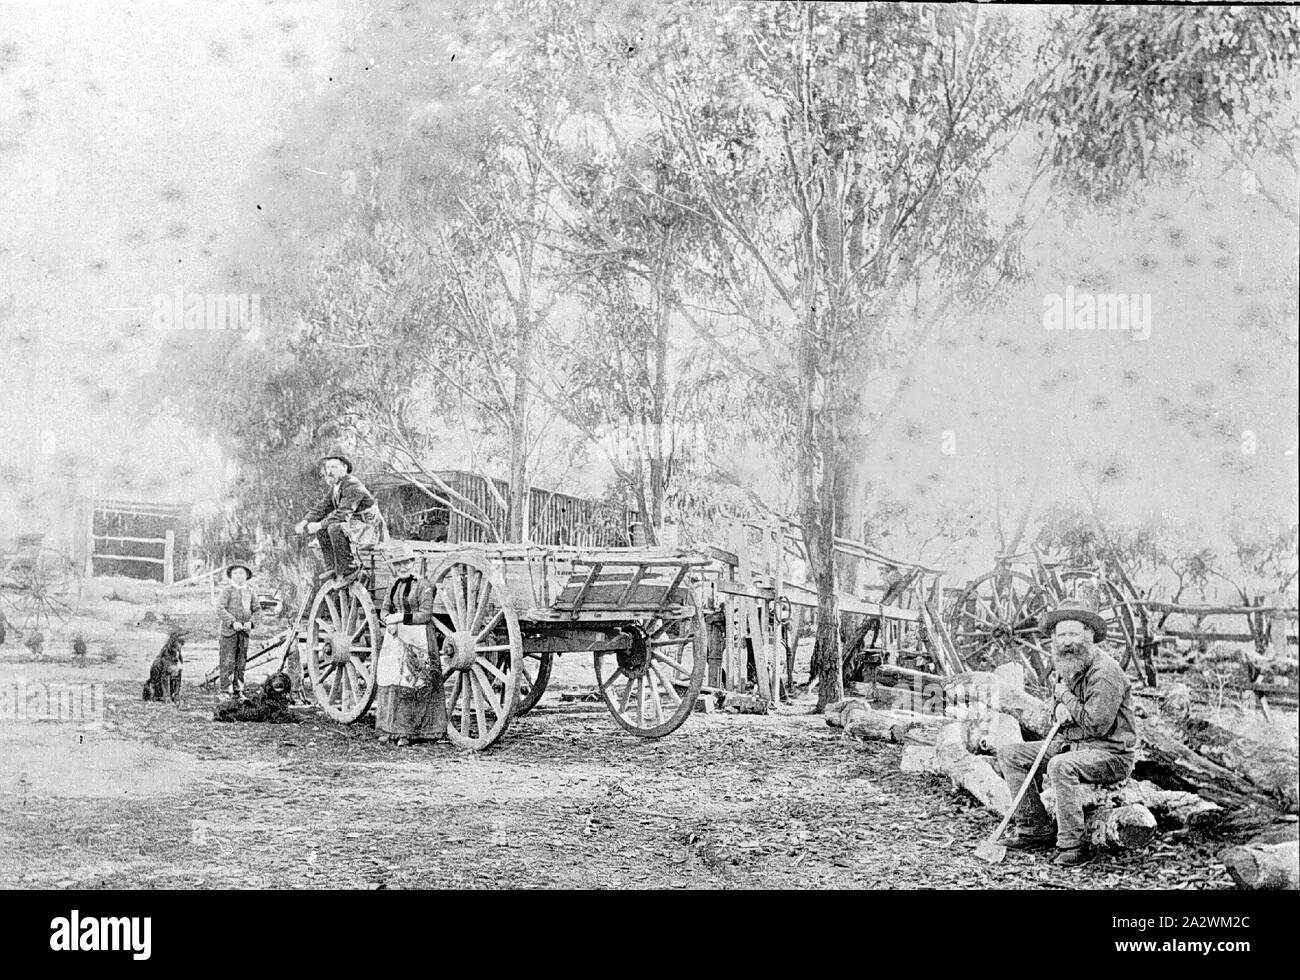 Negative - Boyle Family With Farm Waggon, Lake Goldsmith, Victoria, circa 1885, Robert Boyle and family posing with a farm wagon, on the family's property at Lake Goldsmith. Robert Boyle was the first person to select land at Lake Goldsmith under the Duffy Land Act in 1862. Robert Boyle is seated on a log in the foreground resting an axle against his knee. His wife, Julia, is standing beside the wagon wearing a dress and white apron, and Robert's adult son Samuel is seated on Stock Photo